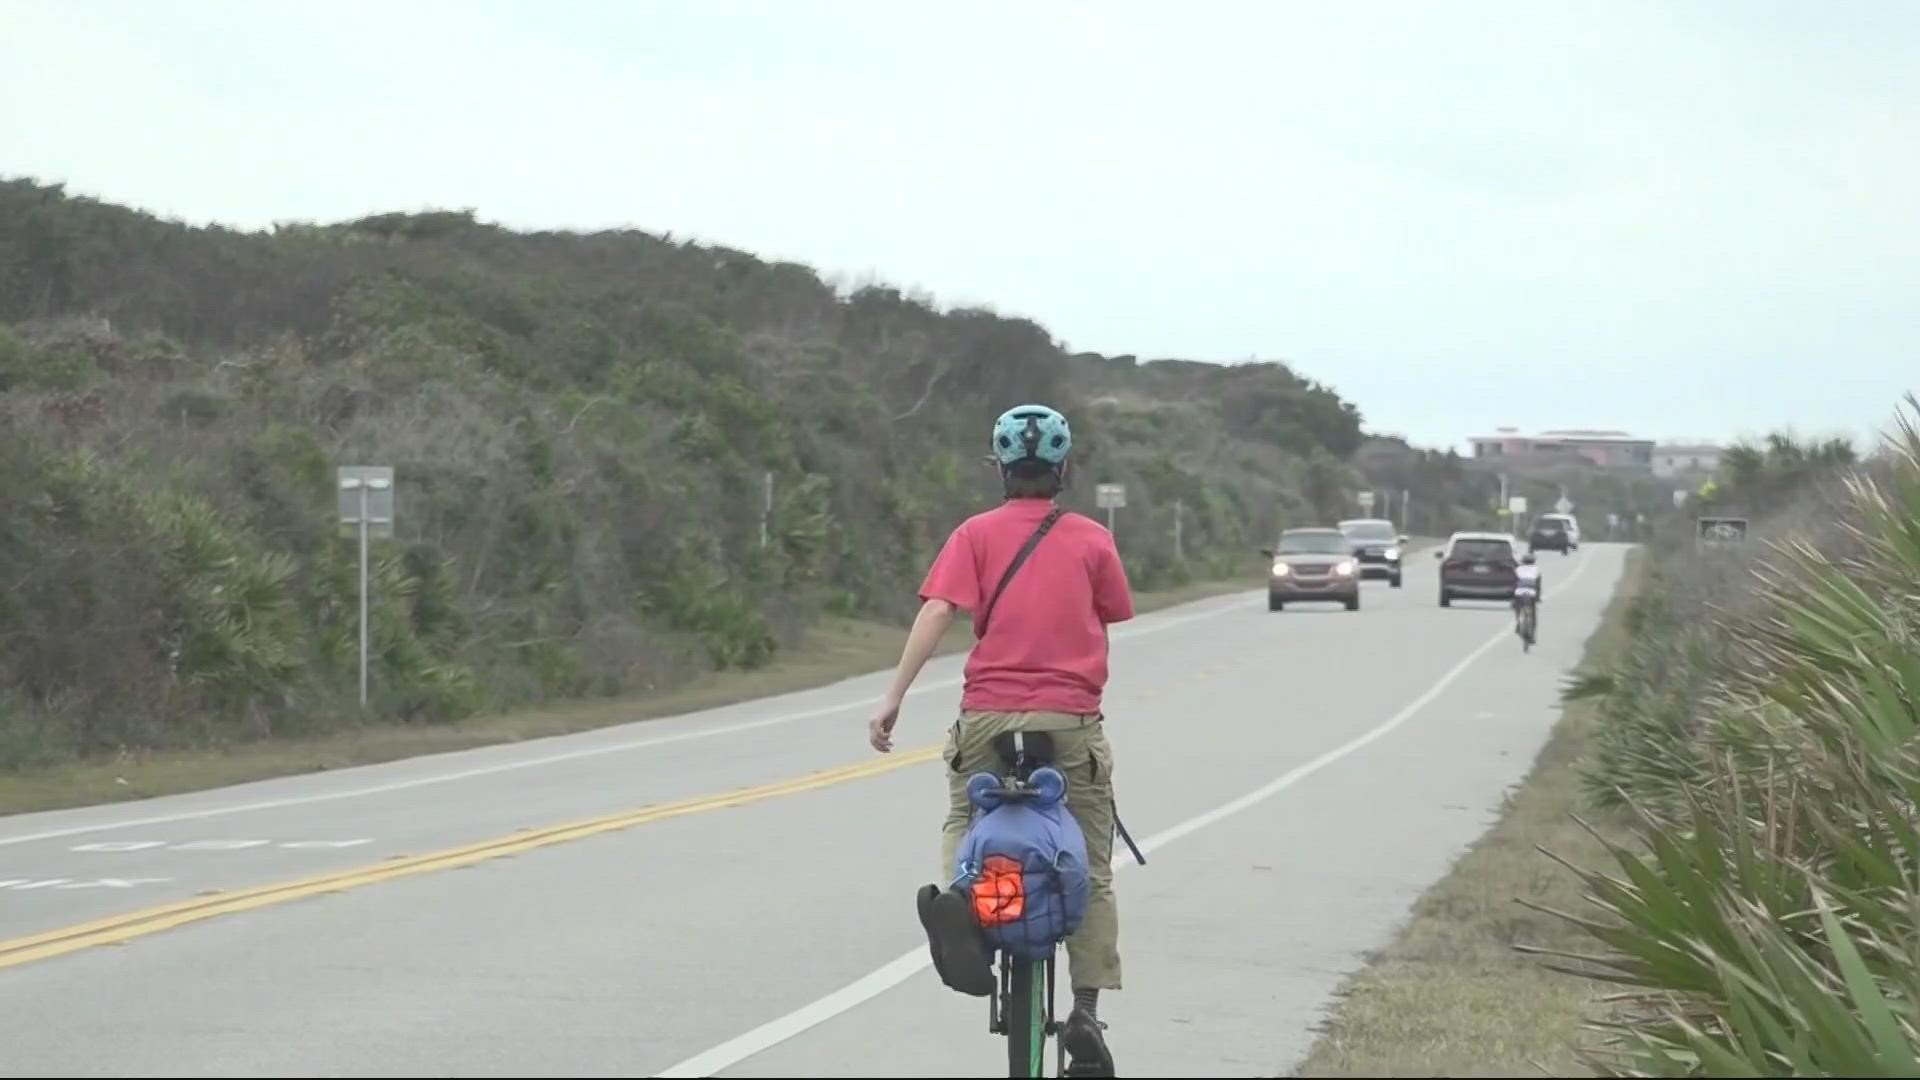 Avery Seuter wanted to raise awareness for sustainable travel and the East Coast Greenway by riding on a unicycle all the way from Maine to Key West.